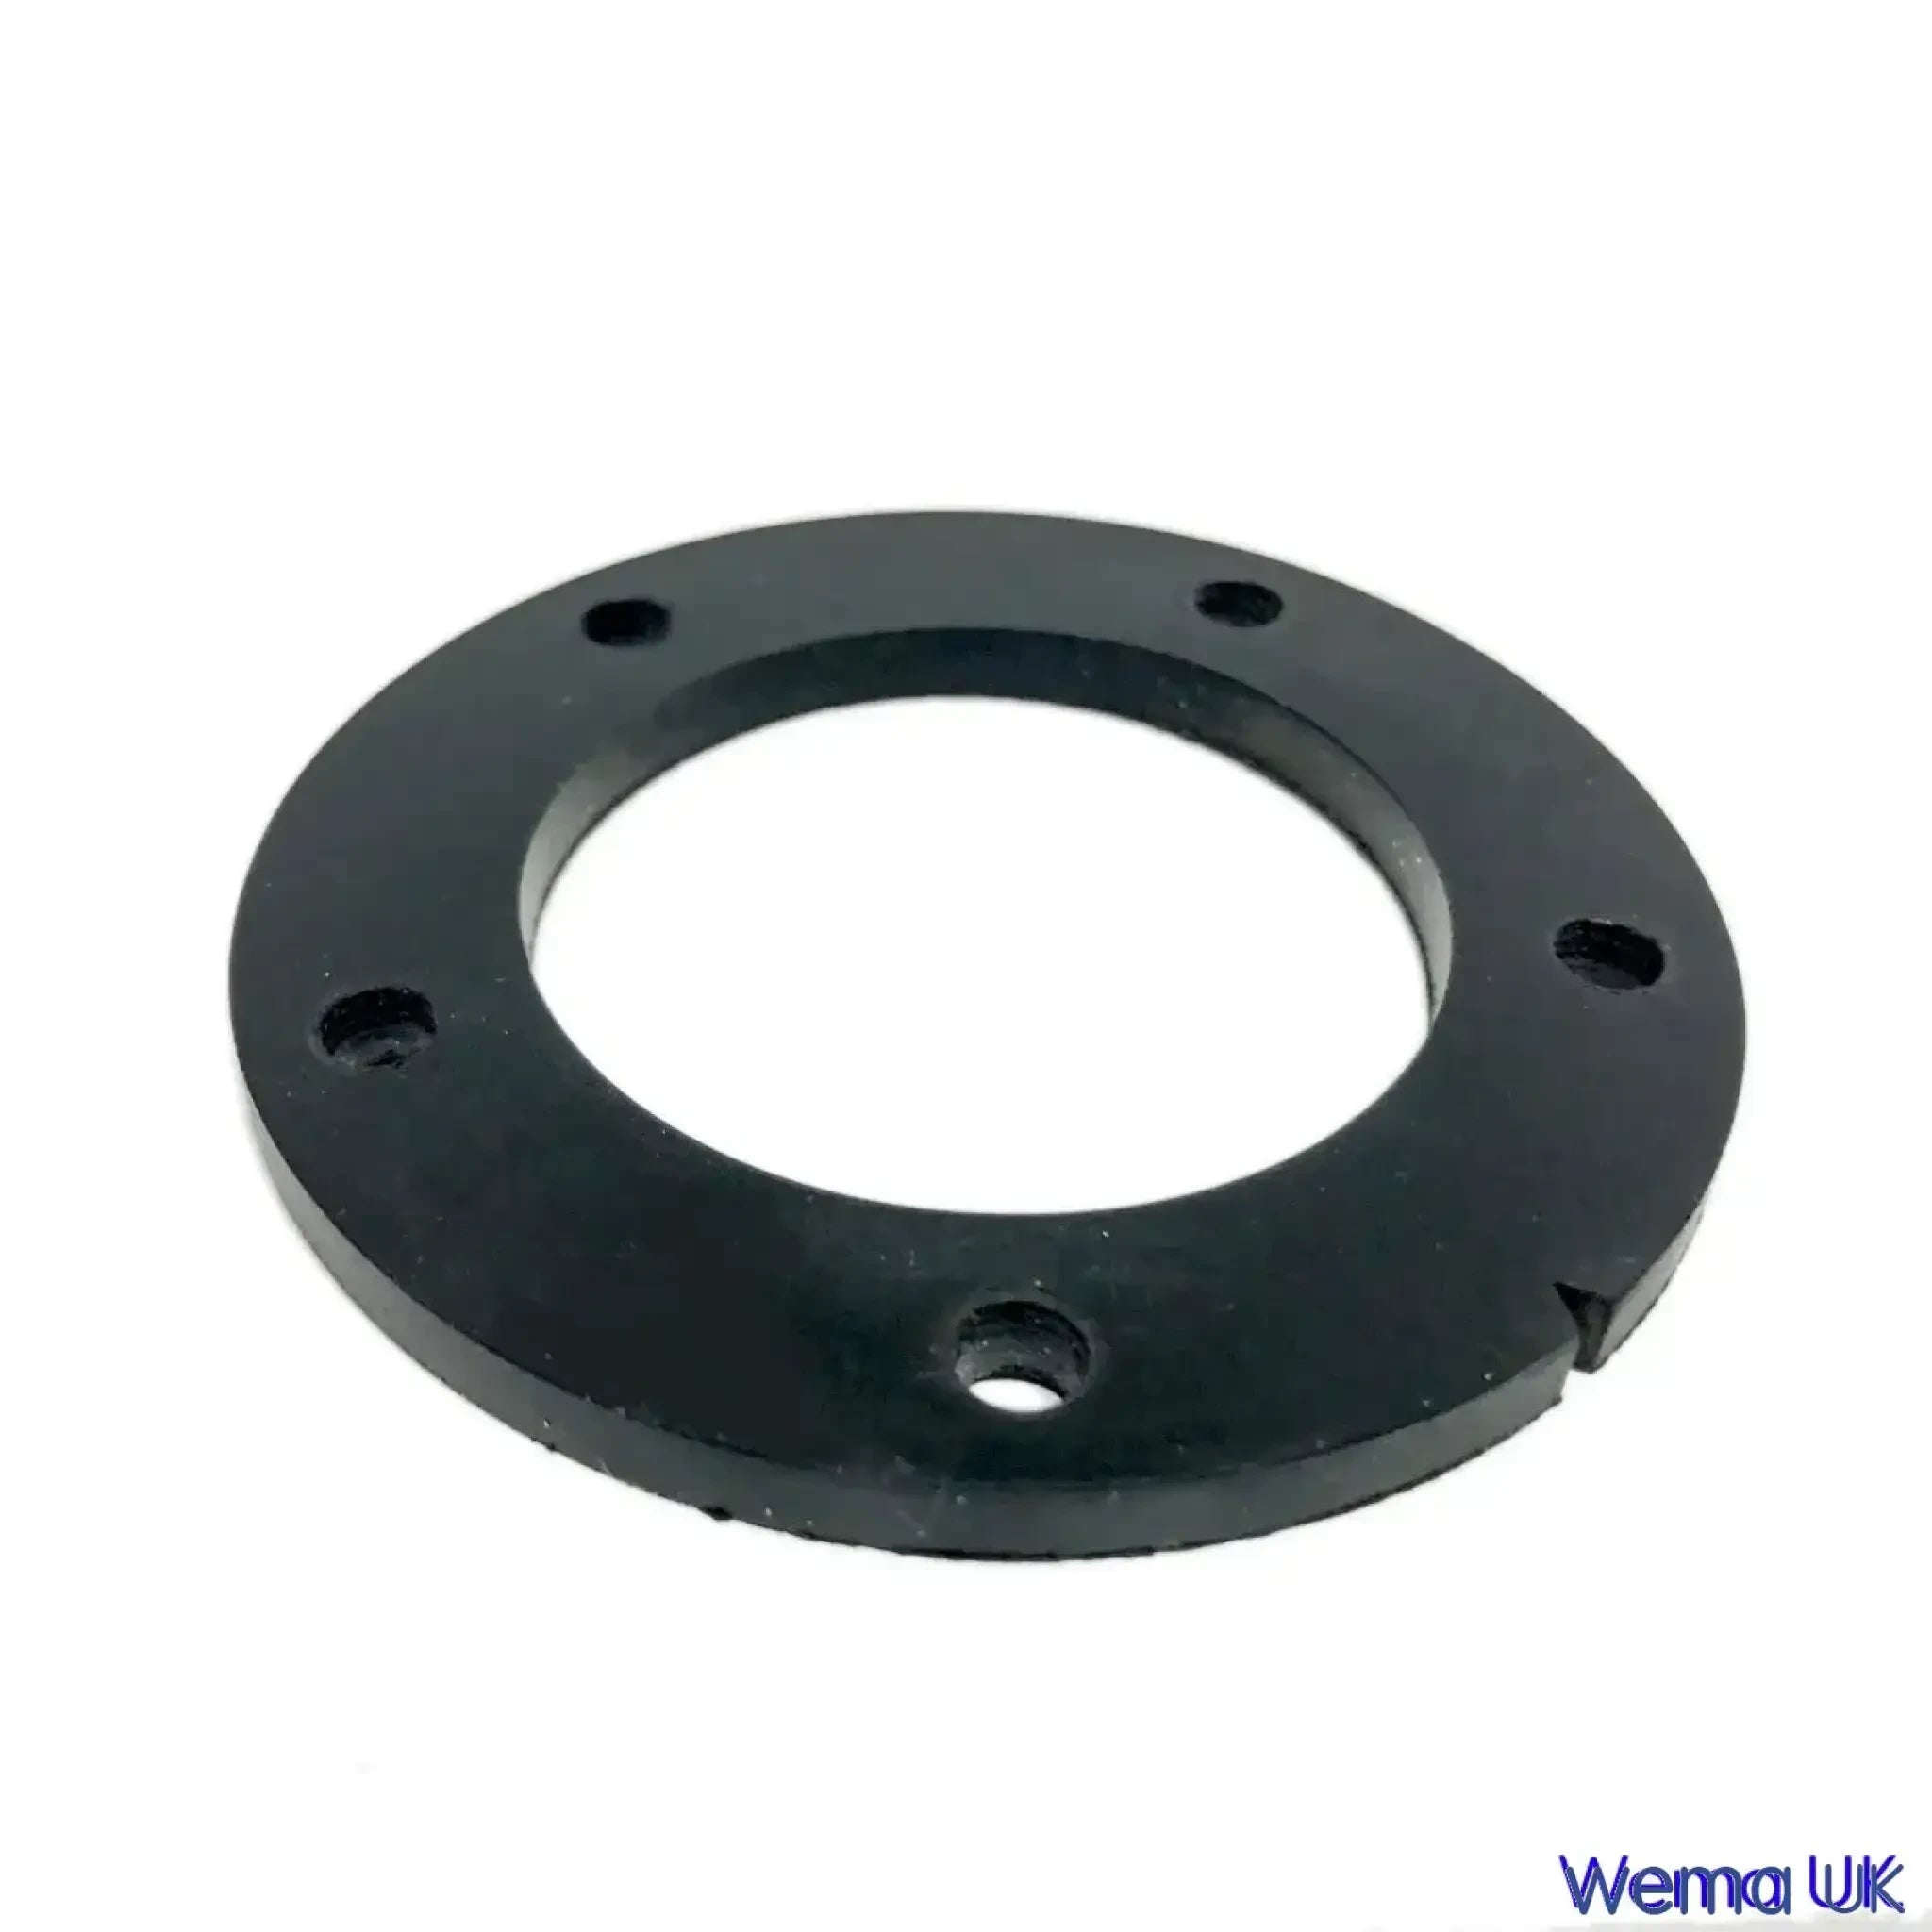 Replacement Nitrile O’Rings / Gaskets - S5 Sender